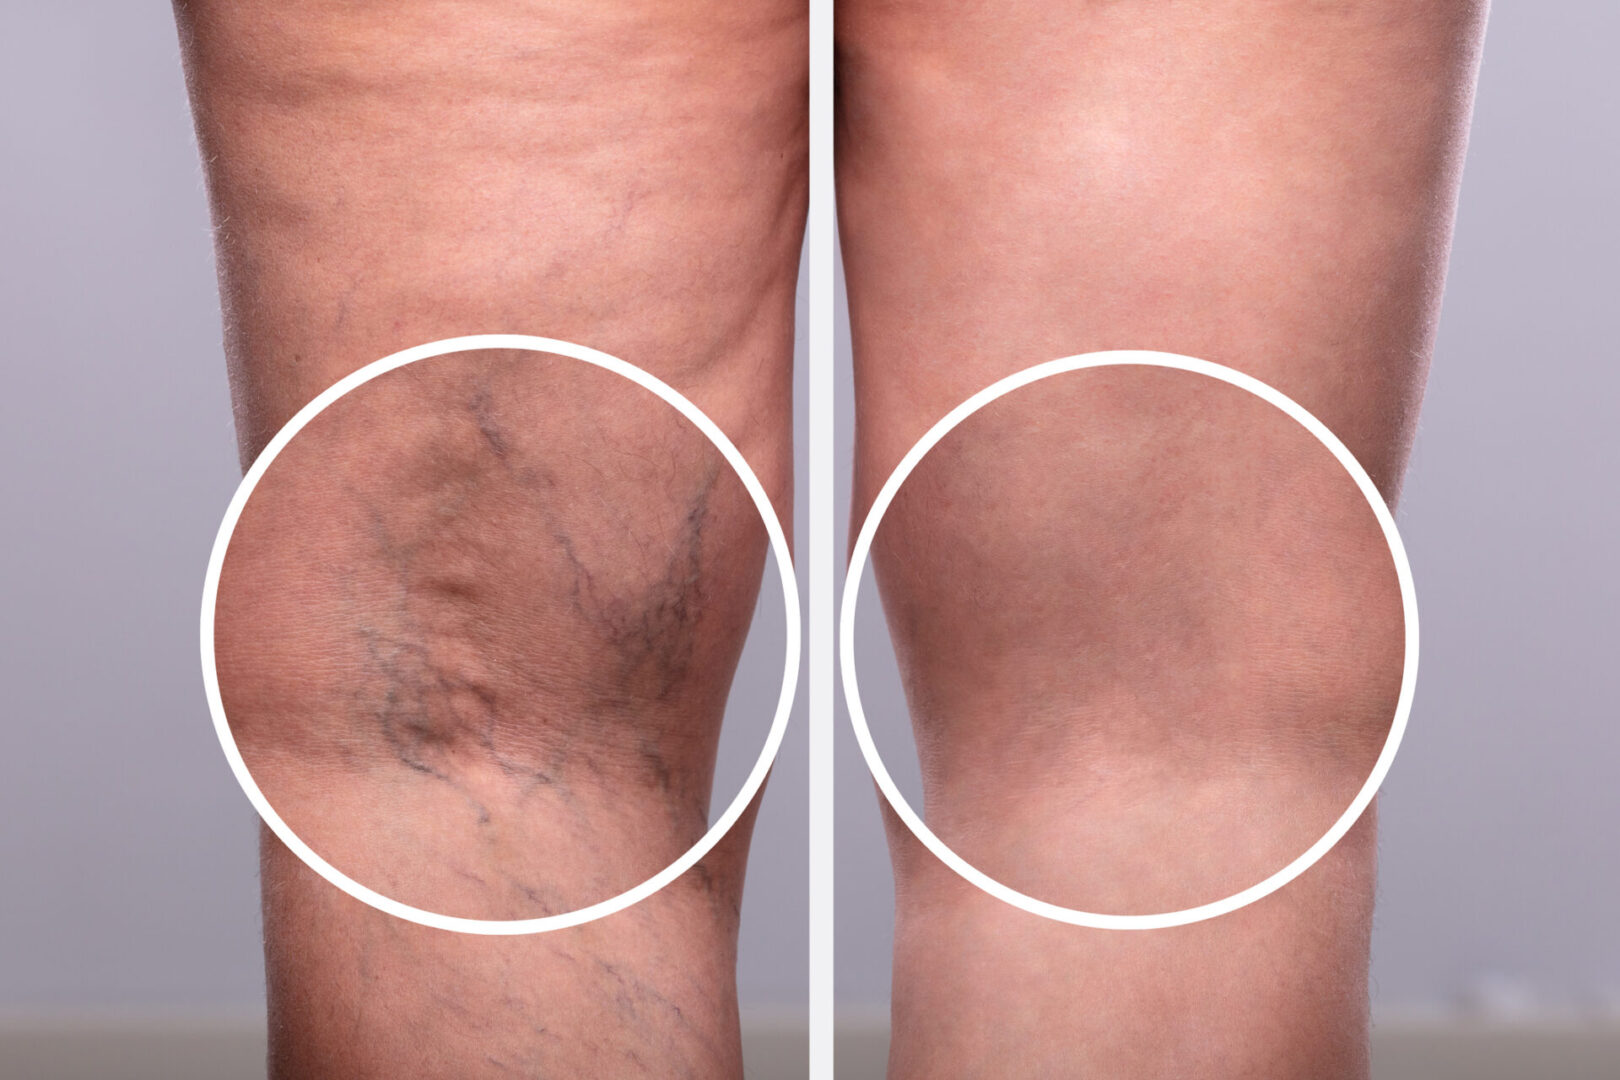 Two pictures of a person with varicose veins.